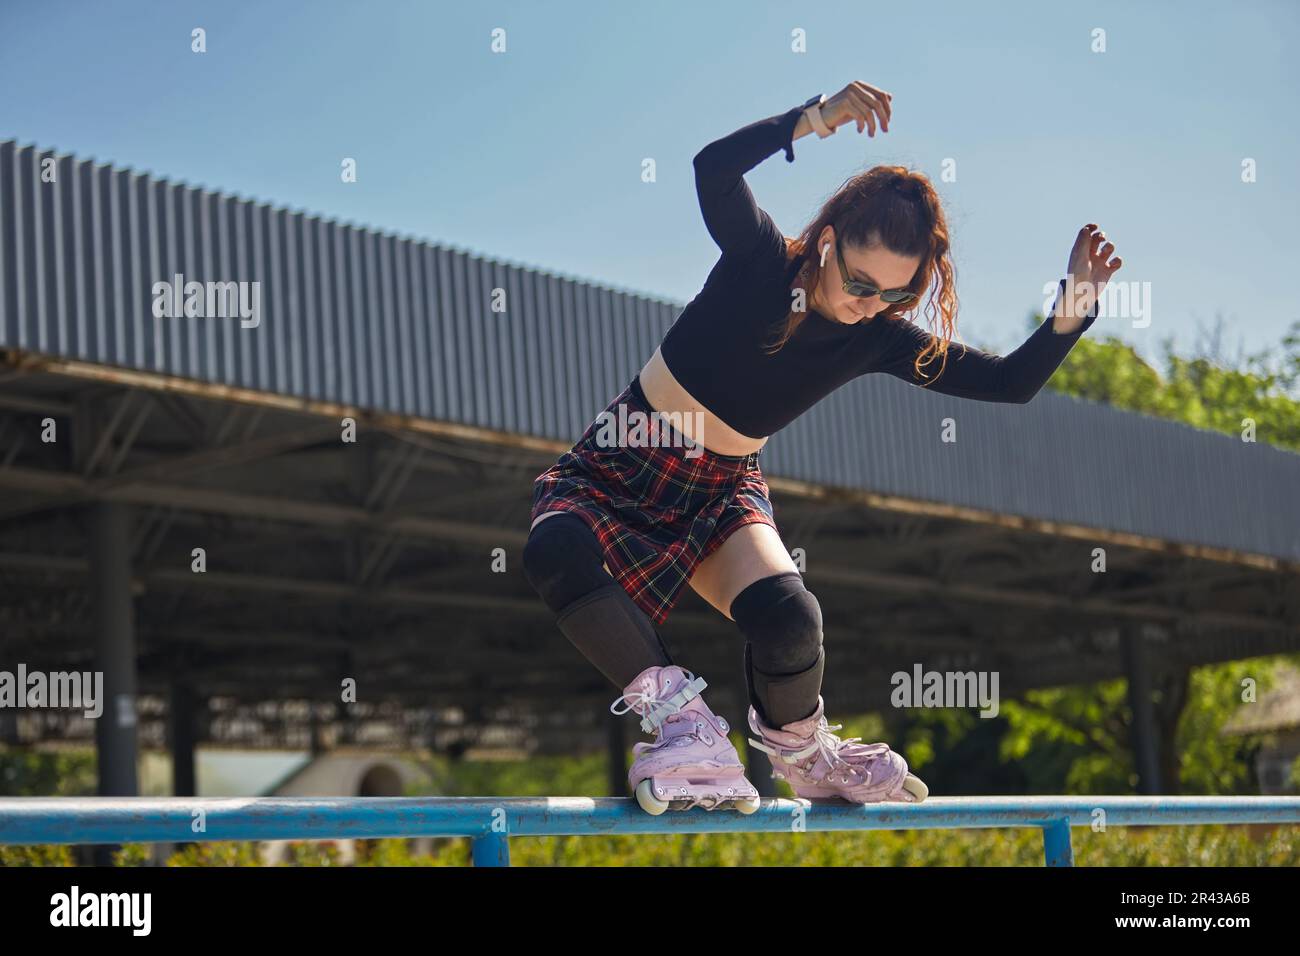 https://c8.alamy.com/comp/2R43A6B/inline-roller-blader-female-performing-a-miszou-grind-trick-on-a-rail-in-a-skatepark-cool-young-skater-person-skating-outdoor-in-sunny-summer-day-2R43A6B.jpg